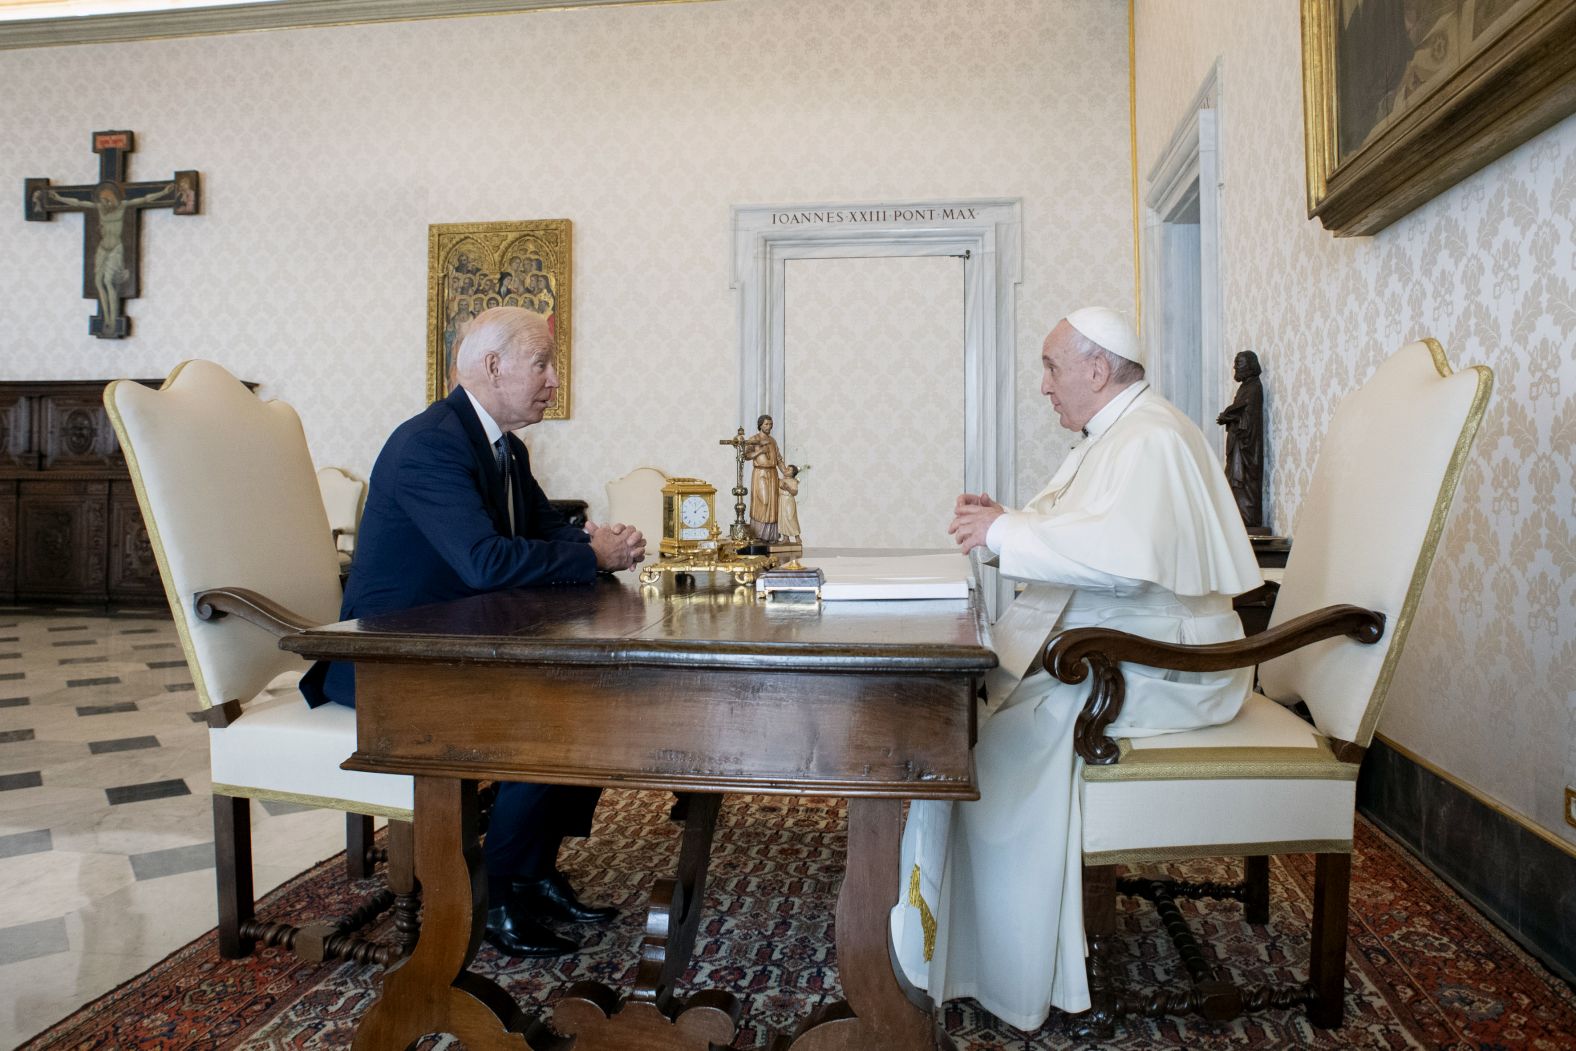 Biden talks with the Pope during their meeting on Friday. The meeting stretched twice as long as the one Biden held with Pope John Paul II as a young senator. Biden told reporters he discussed "a lot of personal things" with the pontiff.